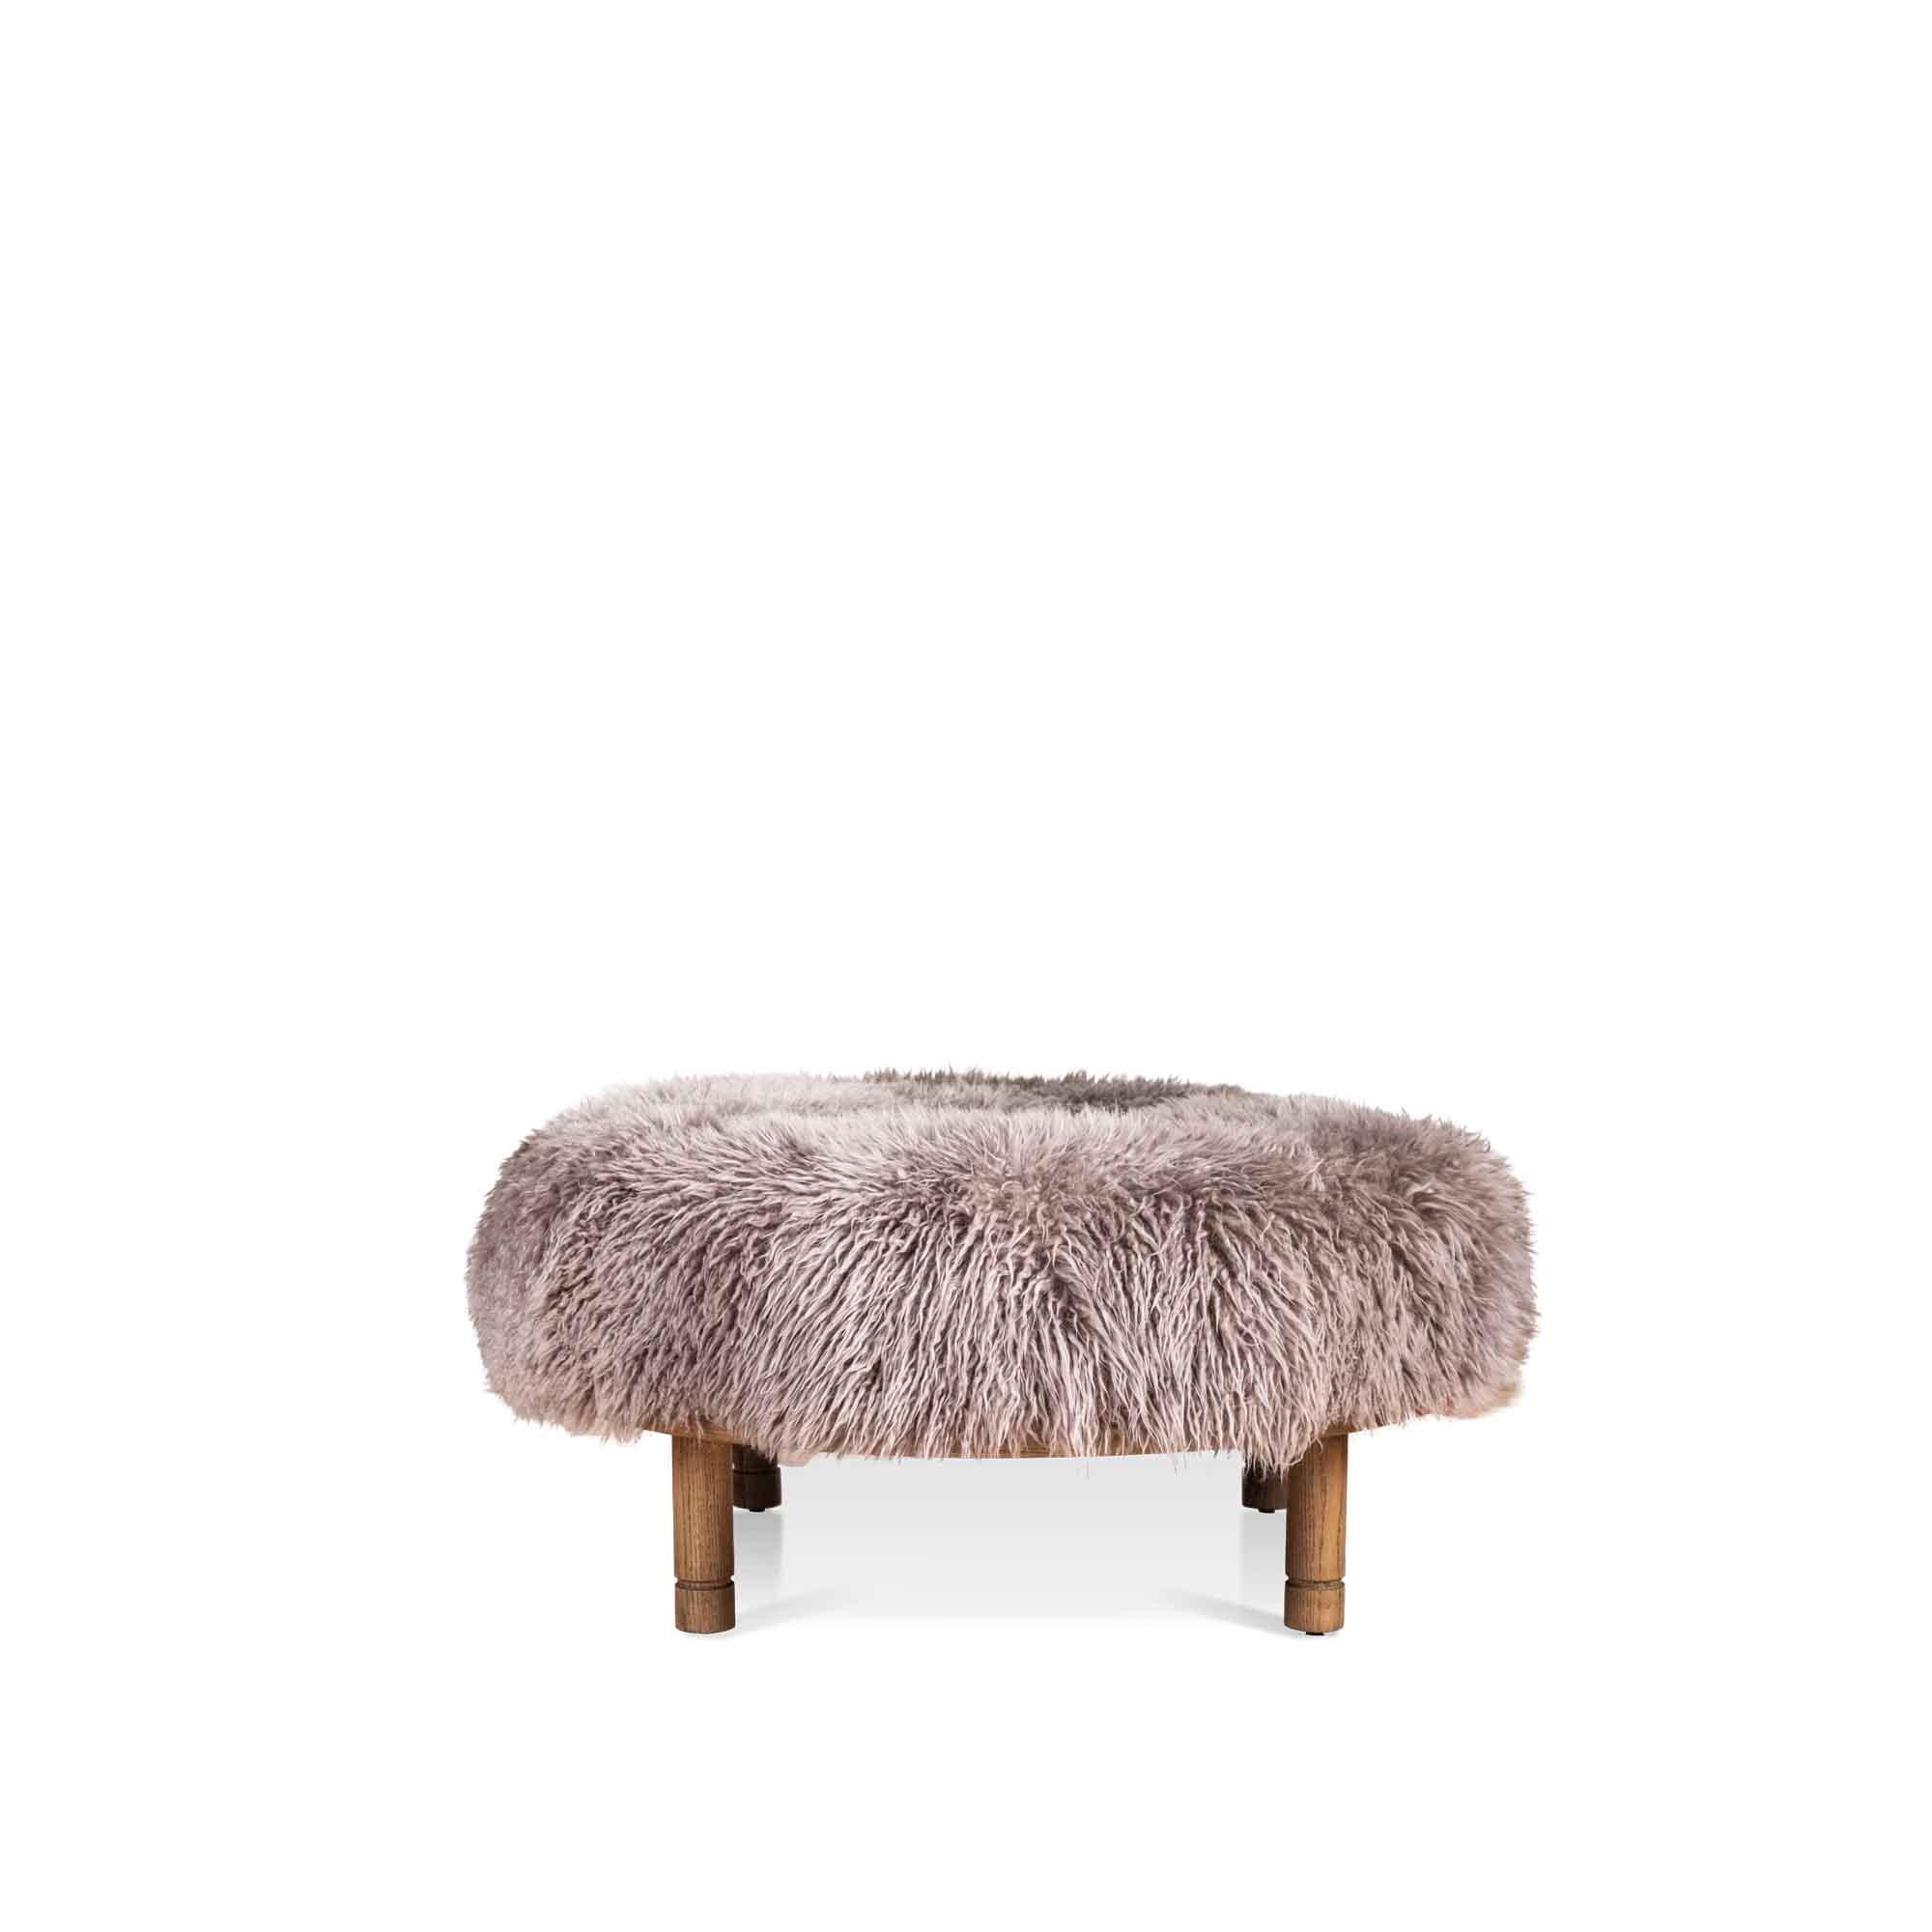 Grey Sheepskin Moreno ottoman by Lawson-Fenning. The Moreno Ottoman features a round solid wood base with four cylindrical legs and an upholstered top. Available in American walnut or white oak. 

The Lawson-Fenning Collection is designed and